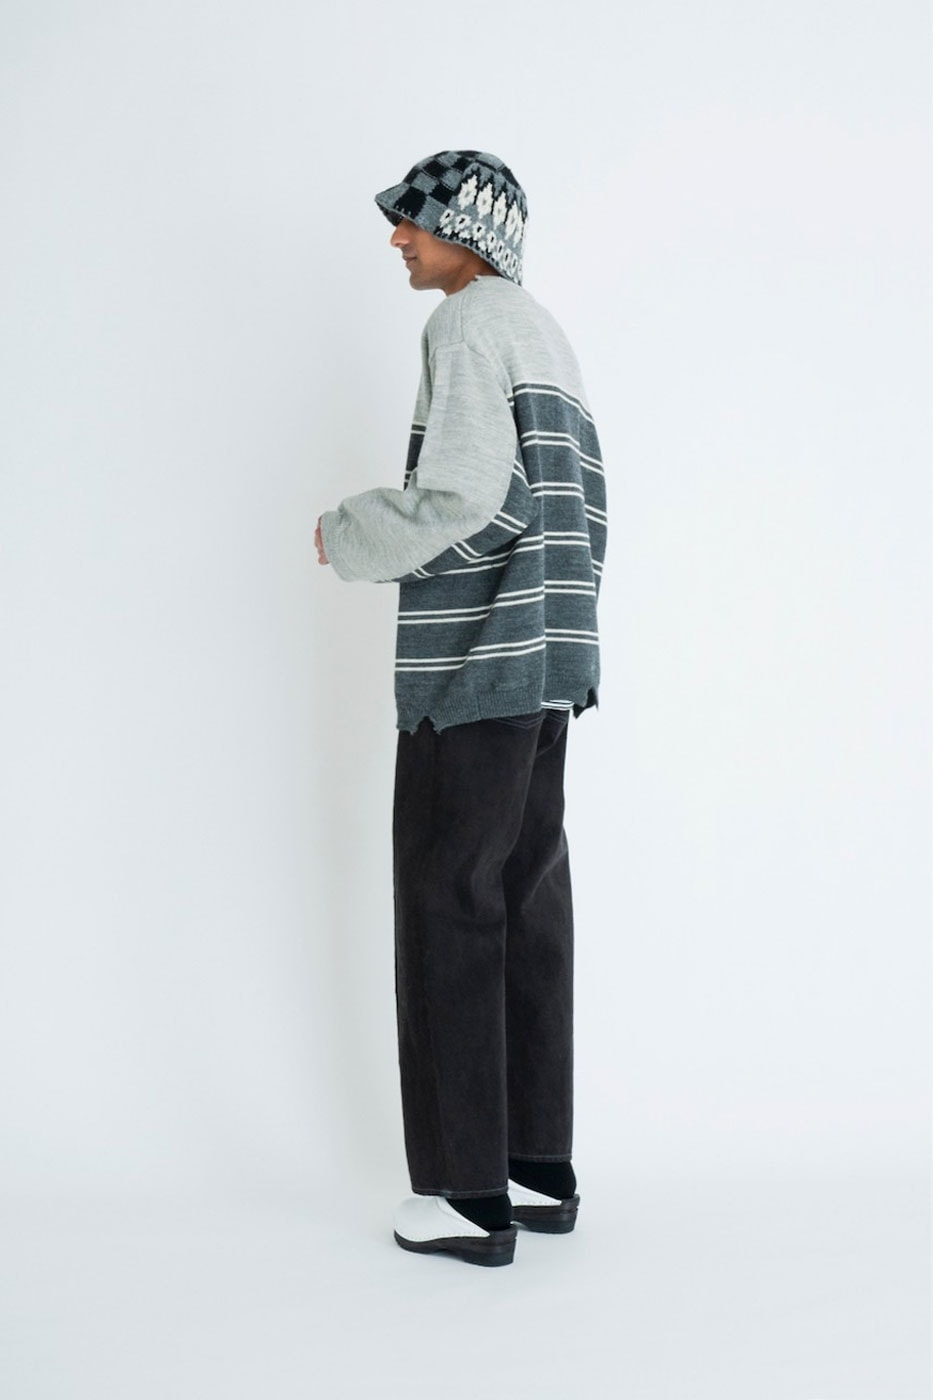 NOMA t.d. FW22 Embodies Surrounding Landscapes With Filled With Nature Inspired Patterns  NOMA t.d. fall winter 2022 lookbook